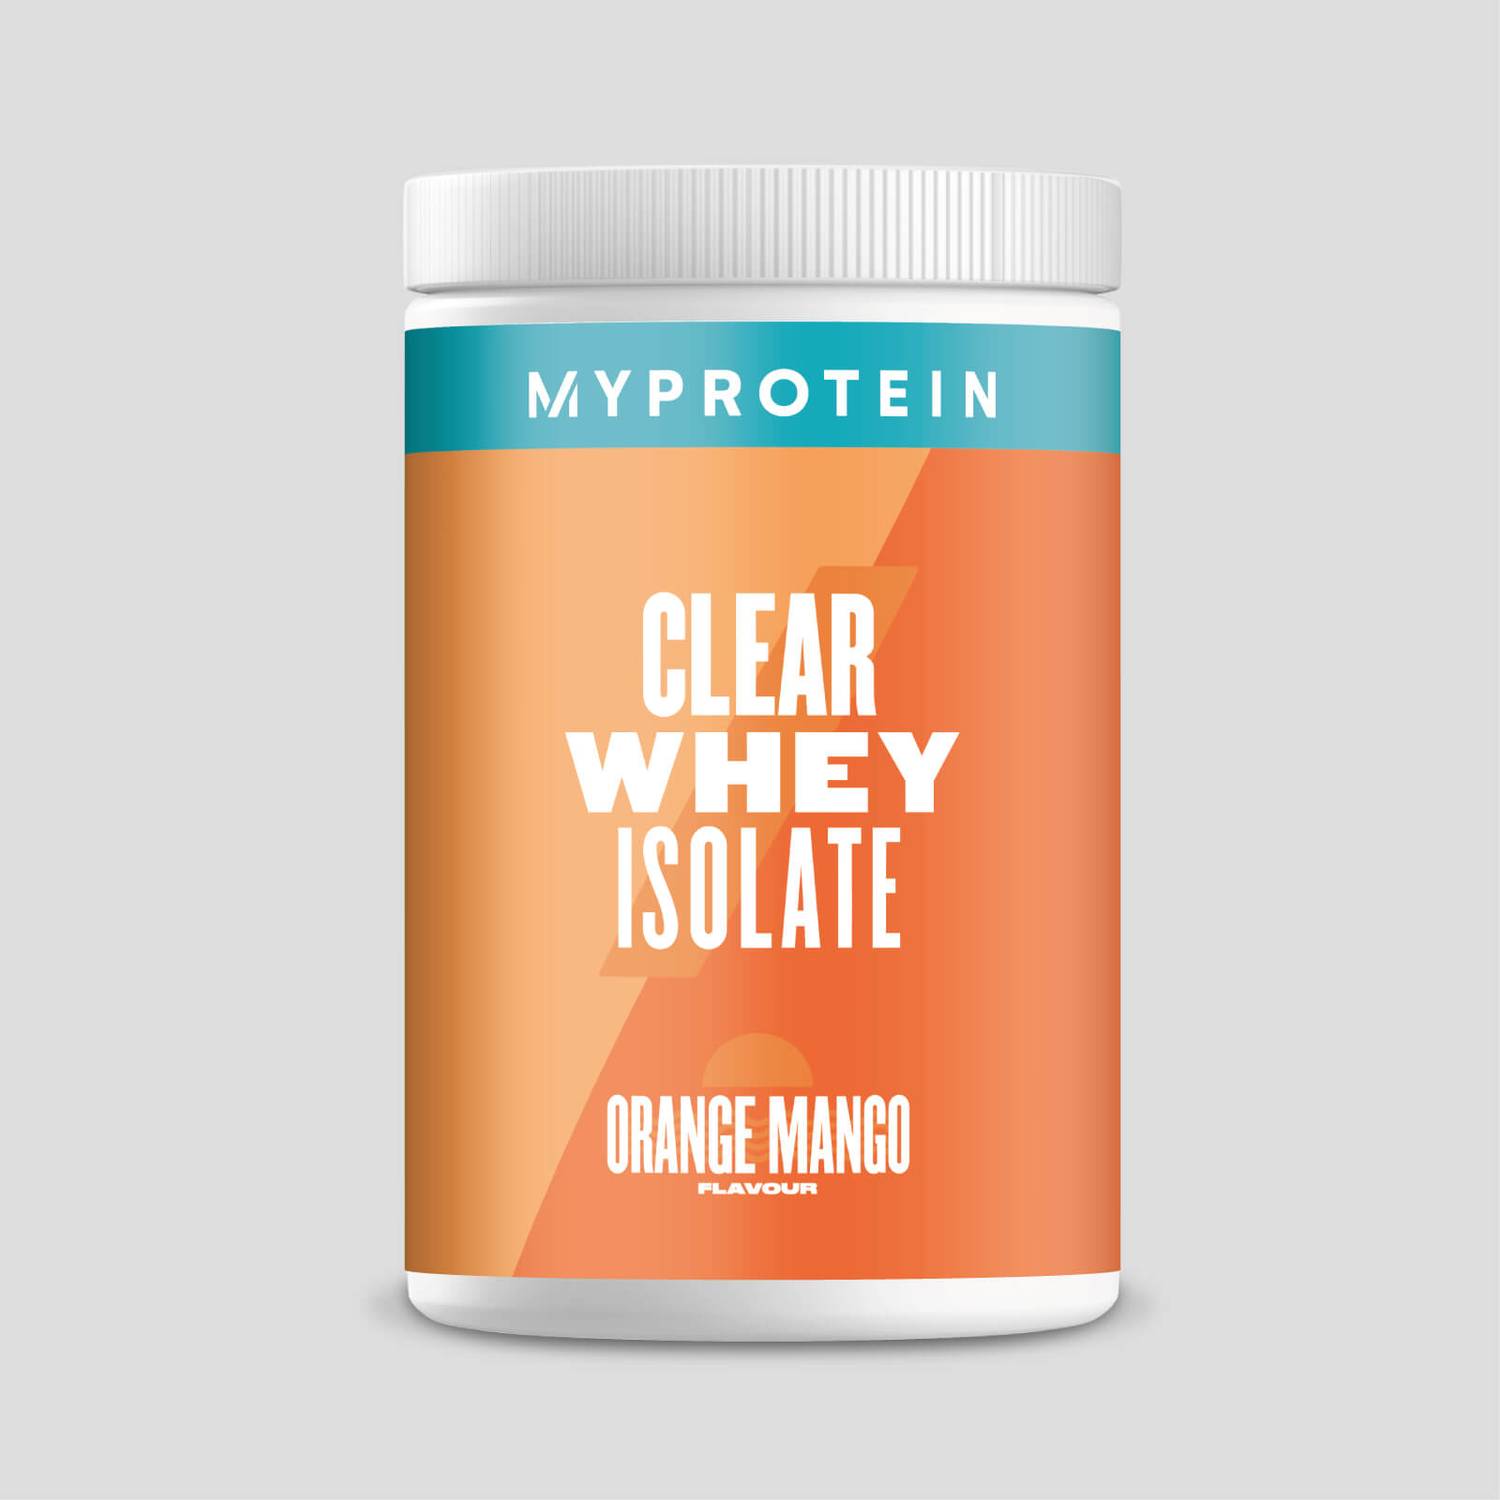 Myprotein clear whey isolate 